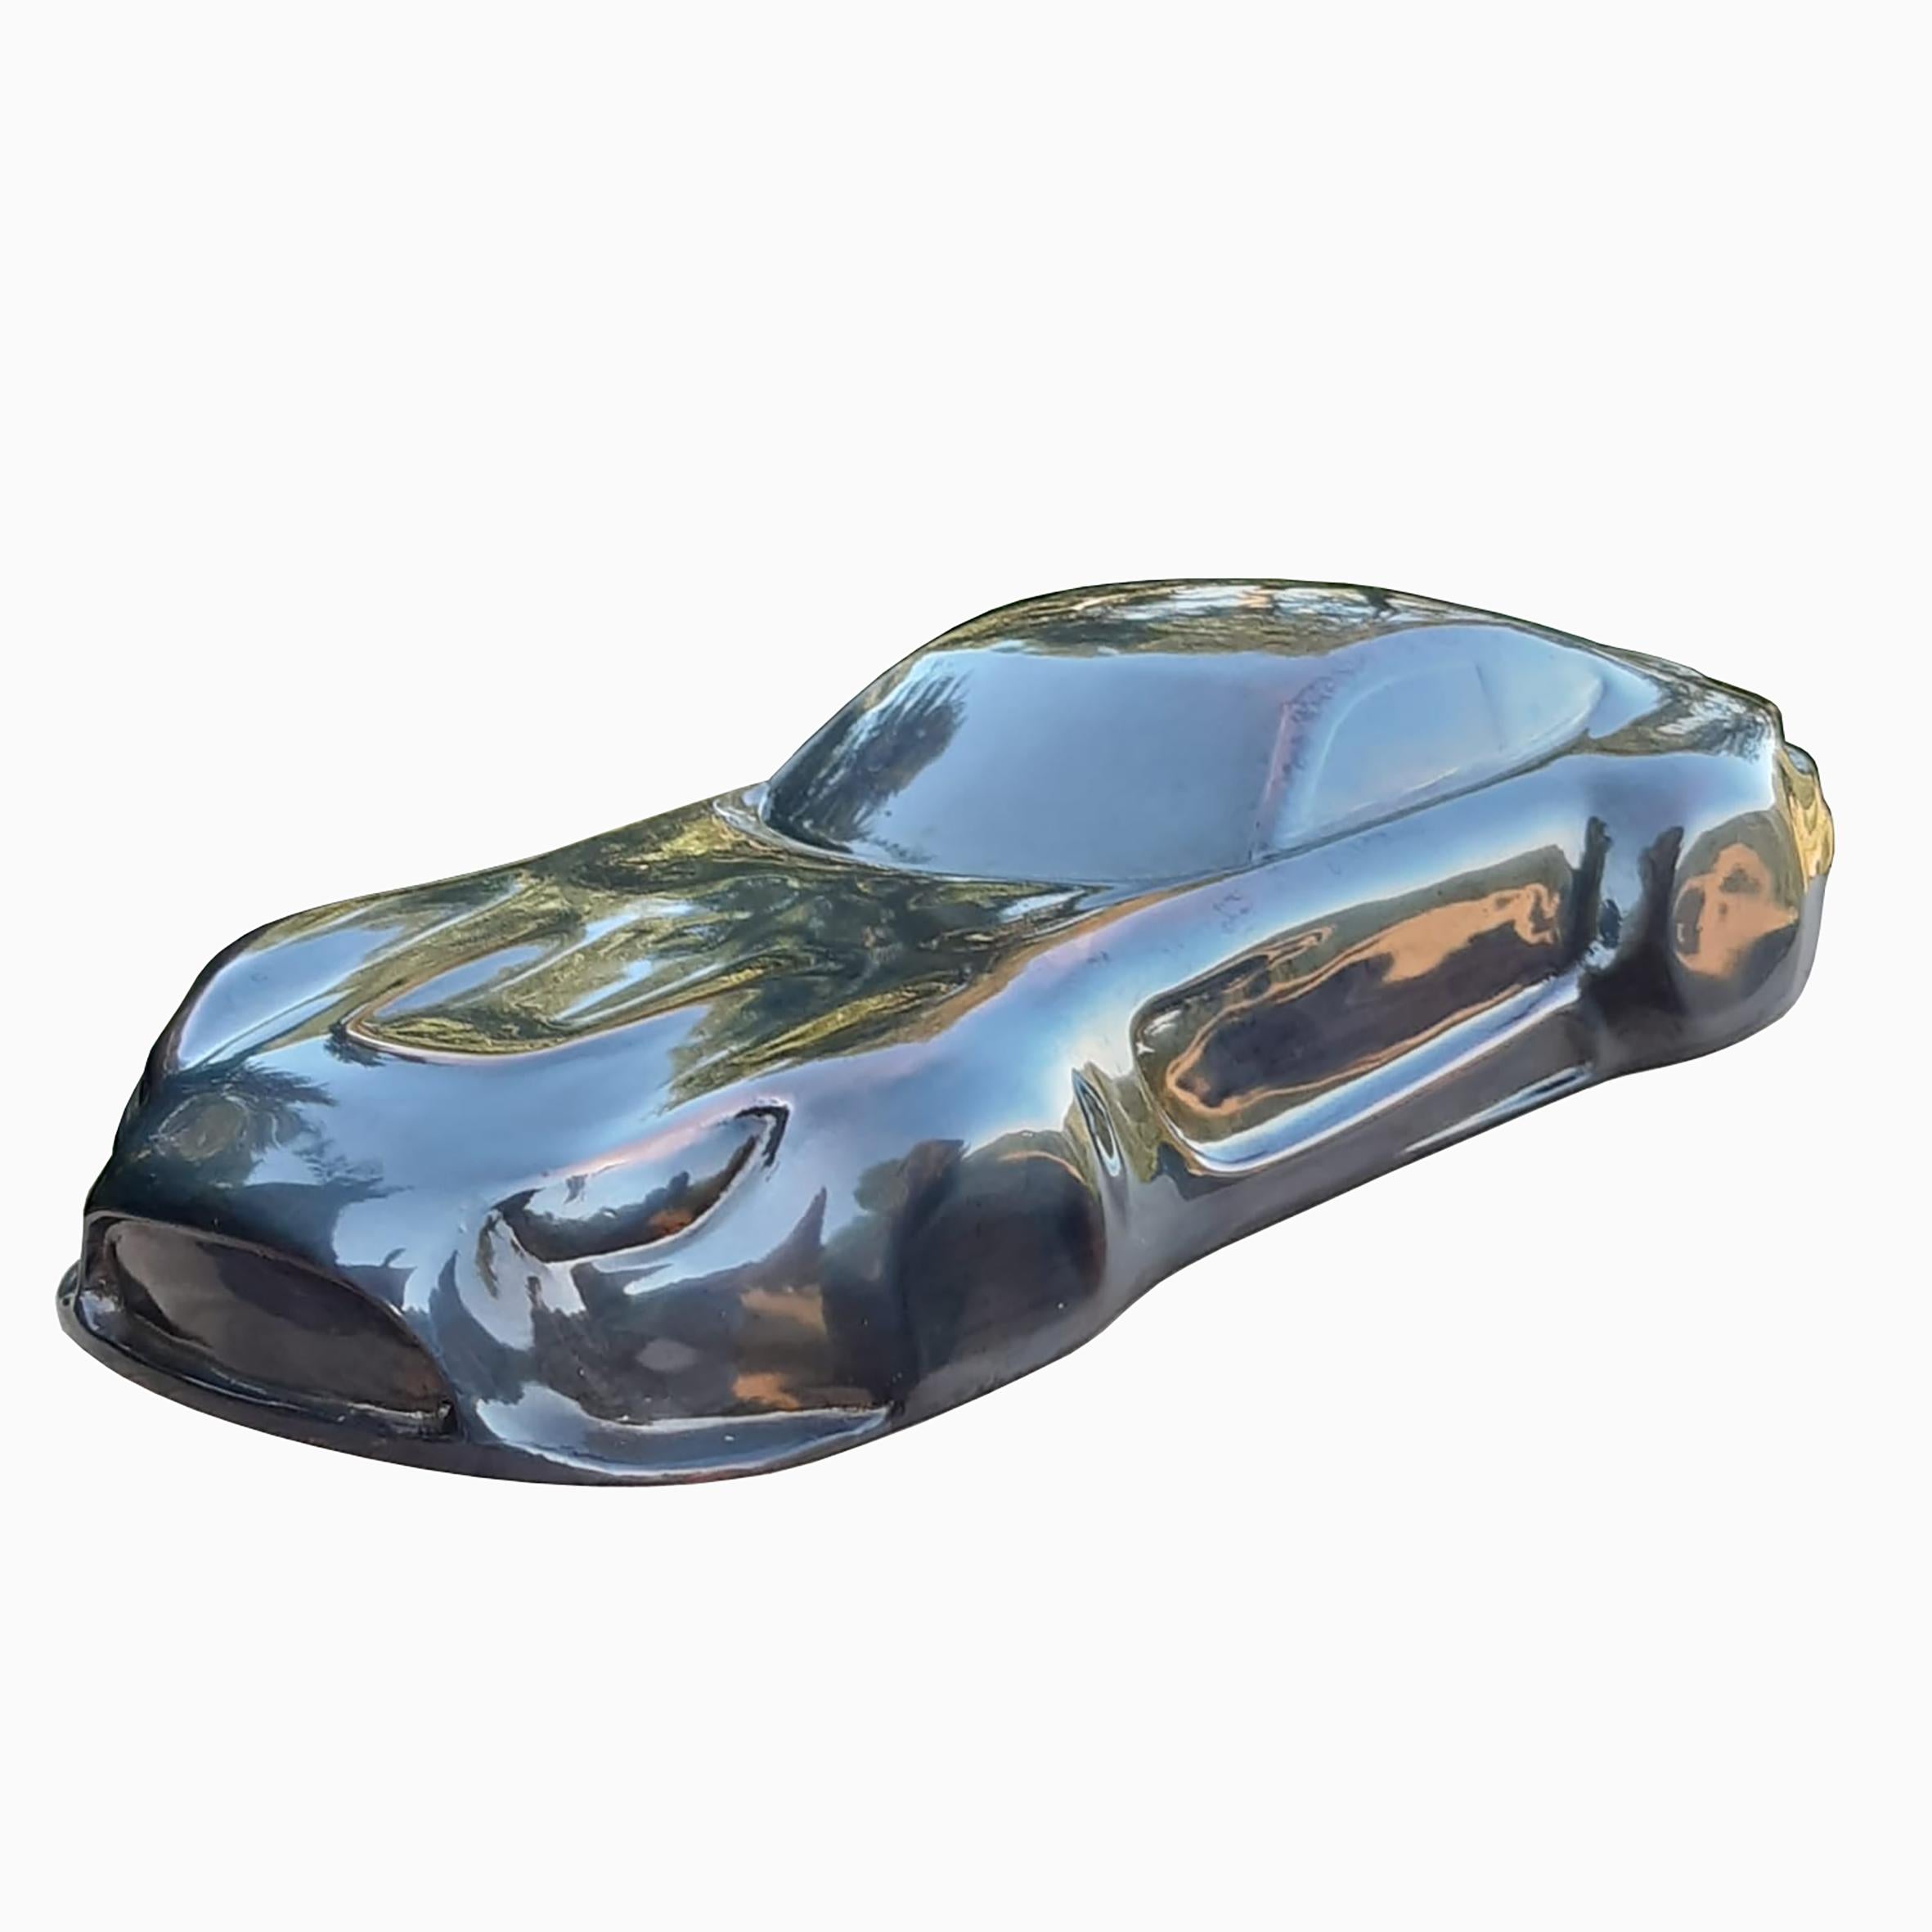 GT-M

A sculpture figuring a GT racing car.
On a rectangular wood base.

Available in various finishes, silvered, polished bronze, lacquered bronze.

Belzoni finds inspiration in the legendary racing cars of the 1950s and the 1960s as well as